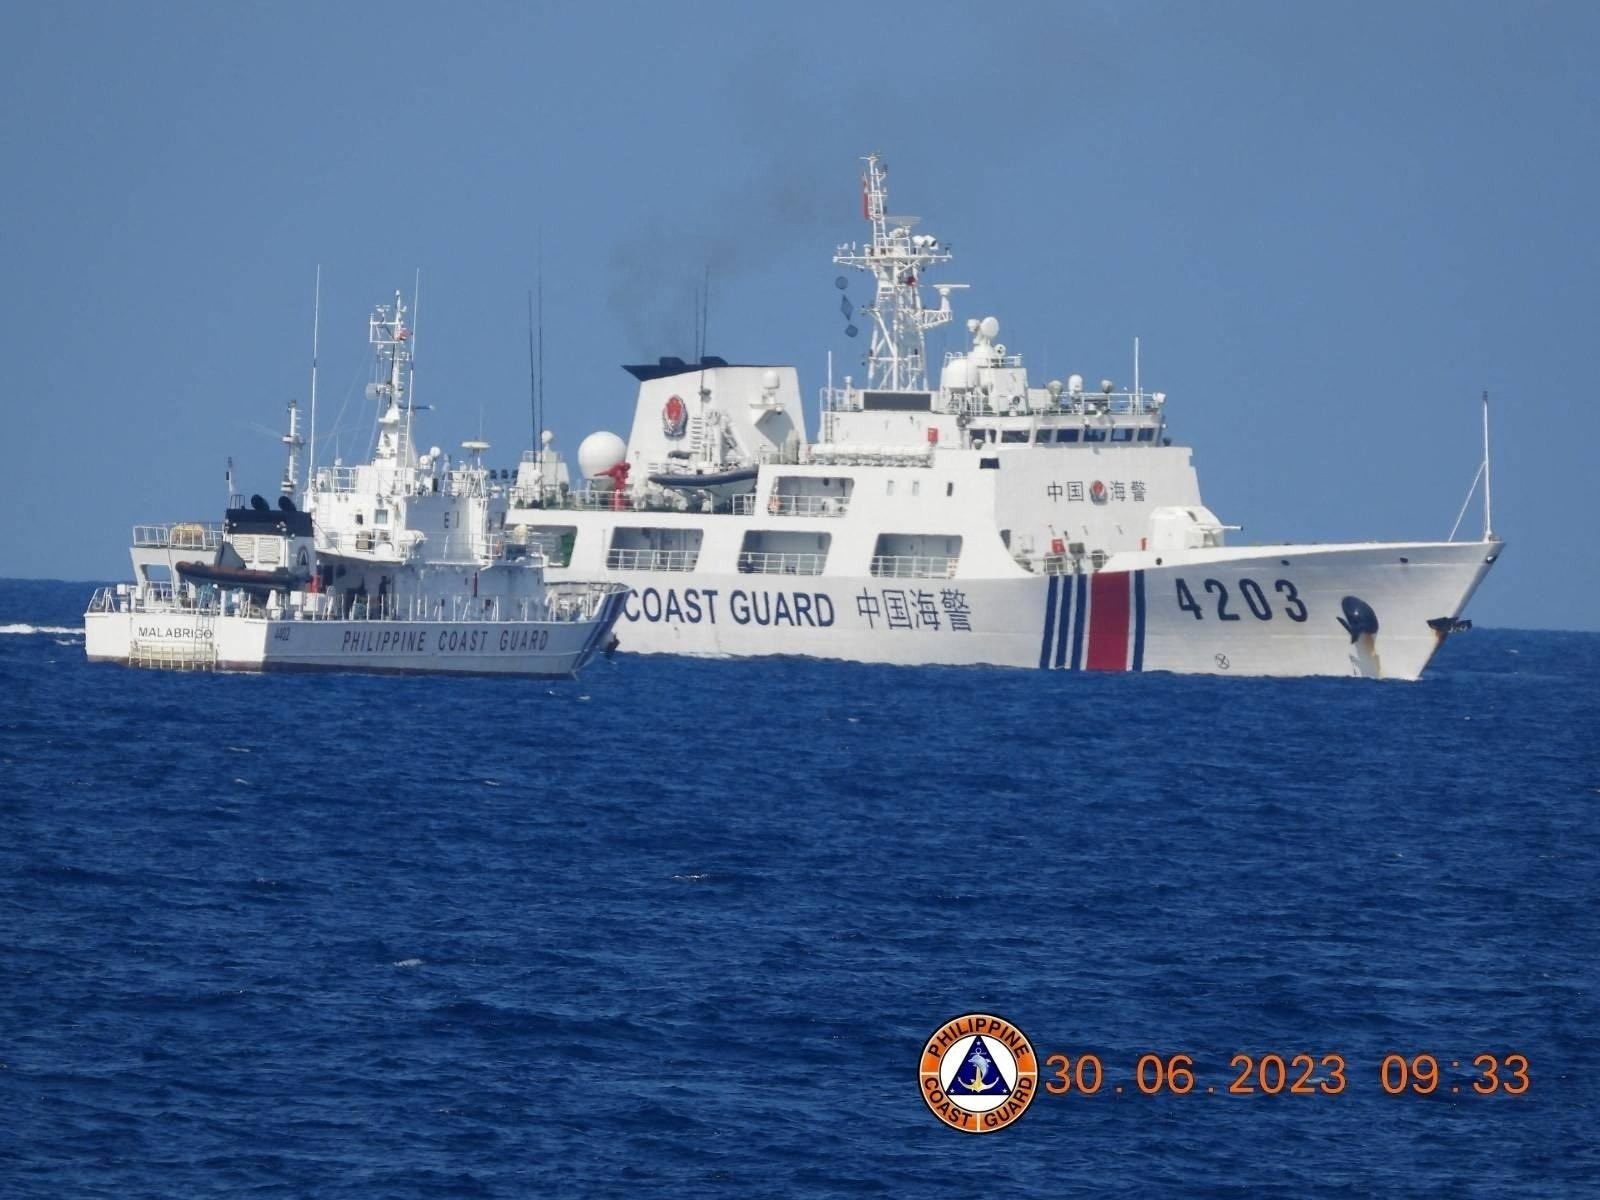 A Chinese Coast Guard ship allegedly obstructs the Philippine Coast Guard vessel Malabrigo as it provided support during a Philippine Navy operation near Second Thomas Shoal in the disputed South China Sea, June 30, 2023 in this handout image released July 5, 2023. Philippine Coast Guard/Handout via REUTERS